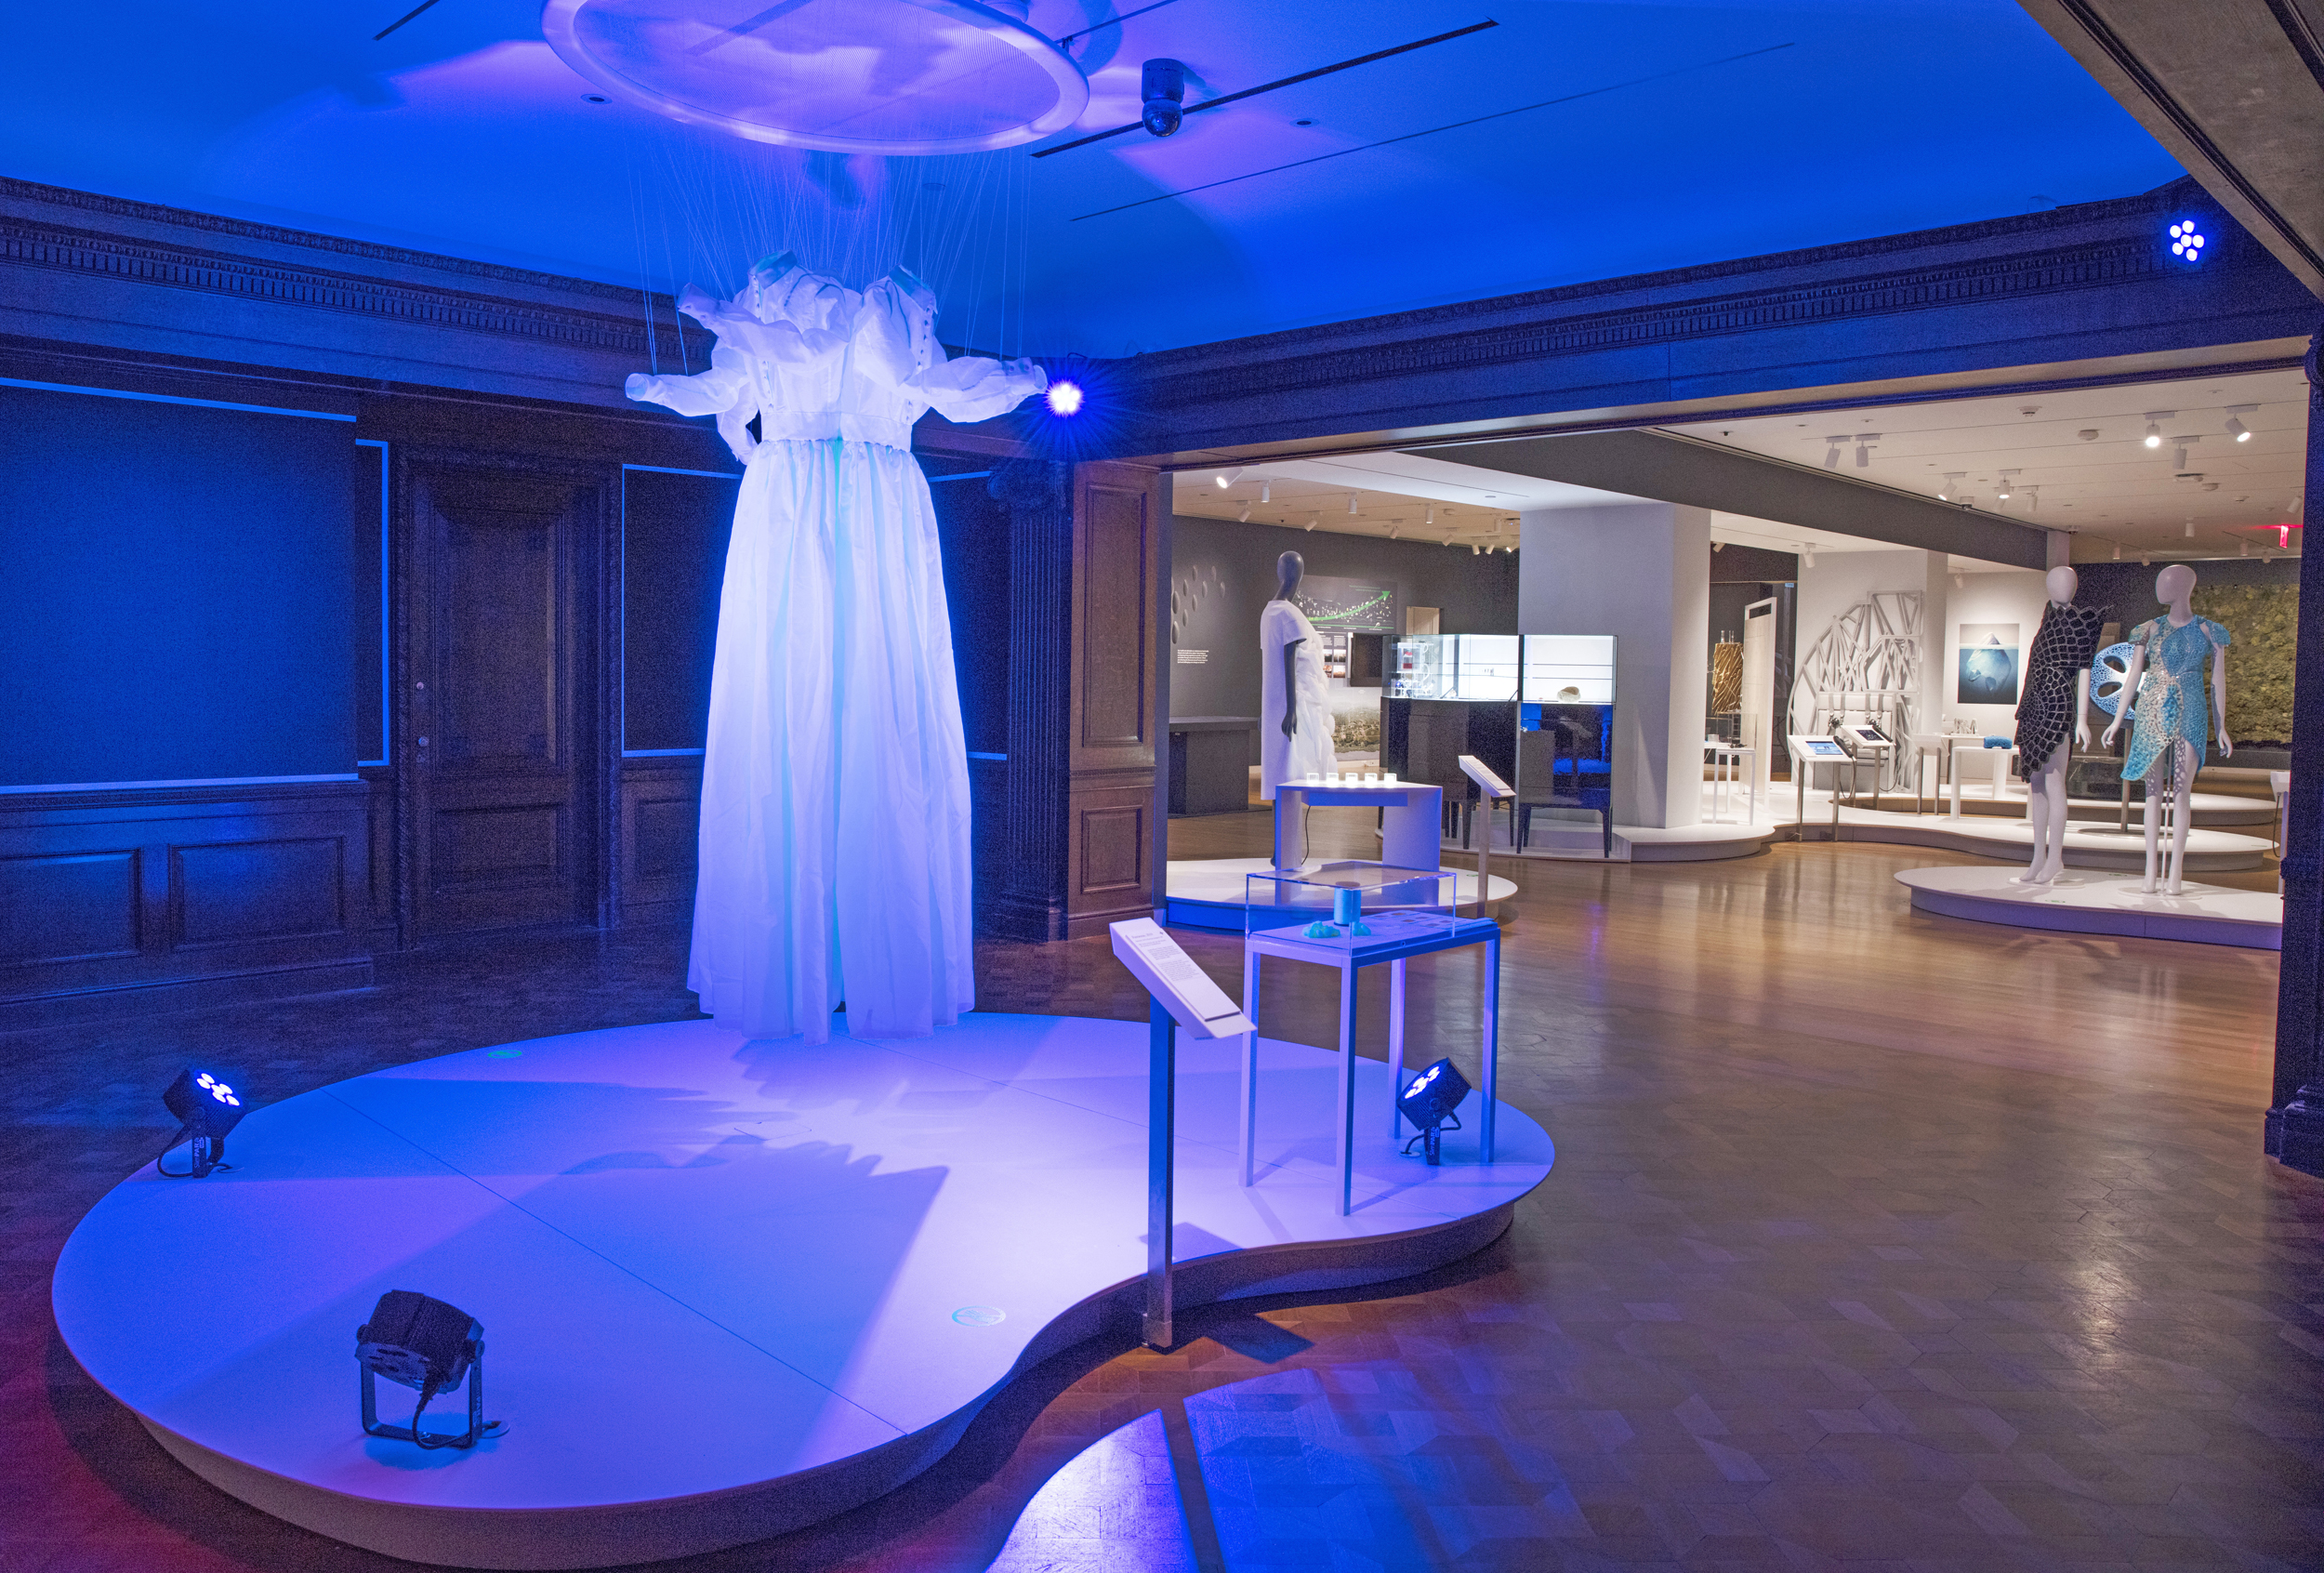 Ghostly prairie dresses, glowing blue, are suspended in the Cooper Hewitt galleries.